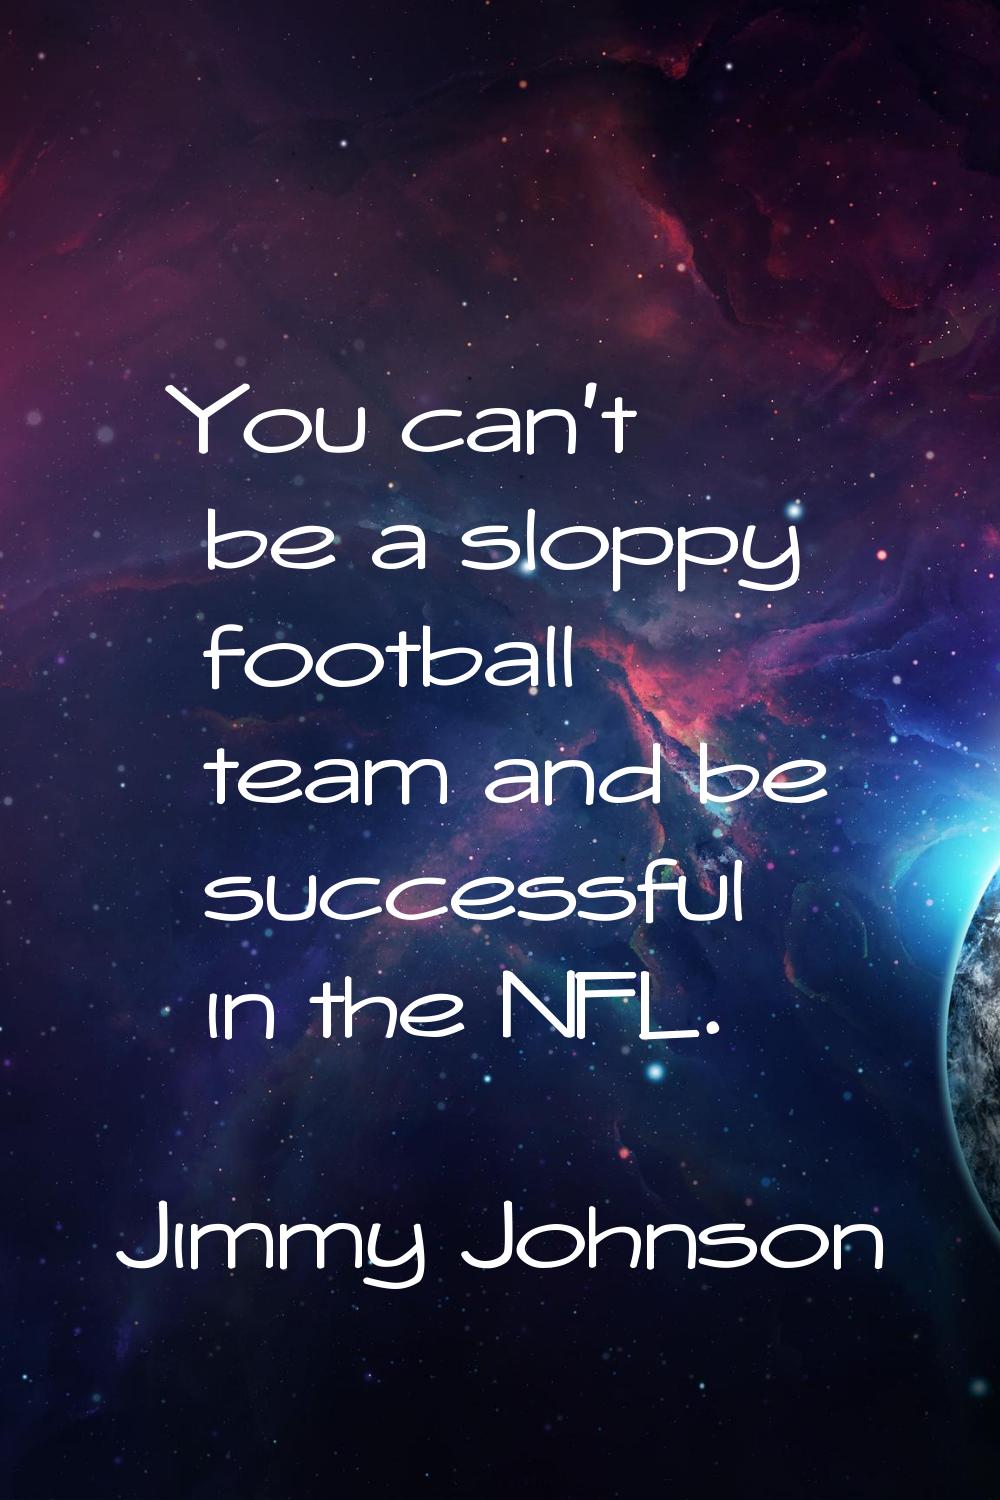 You can't be a sloppy football team and be successful in the NFL.